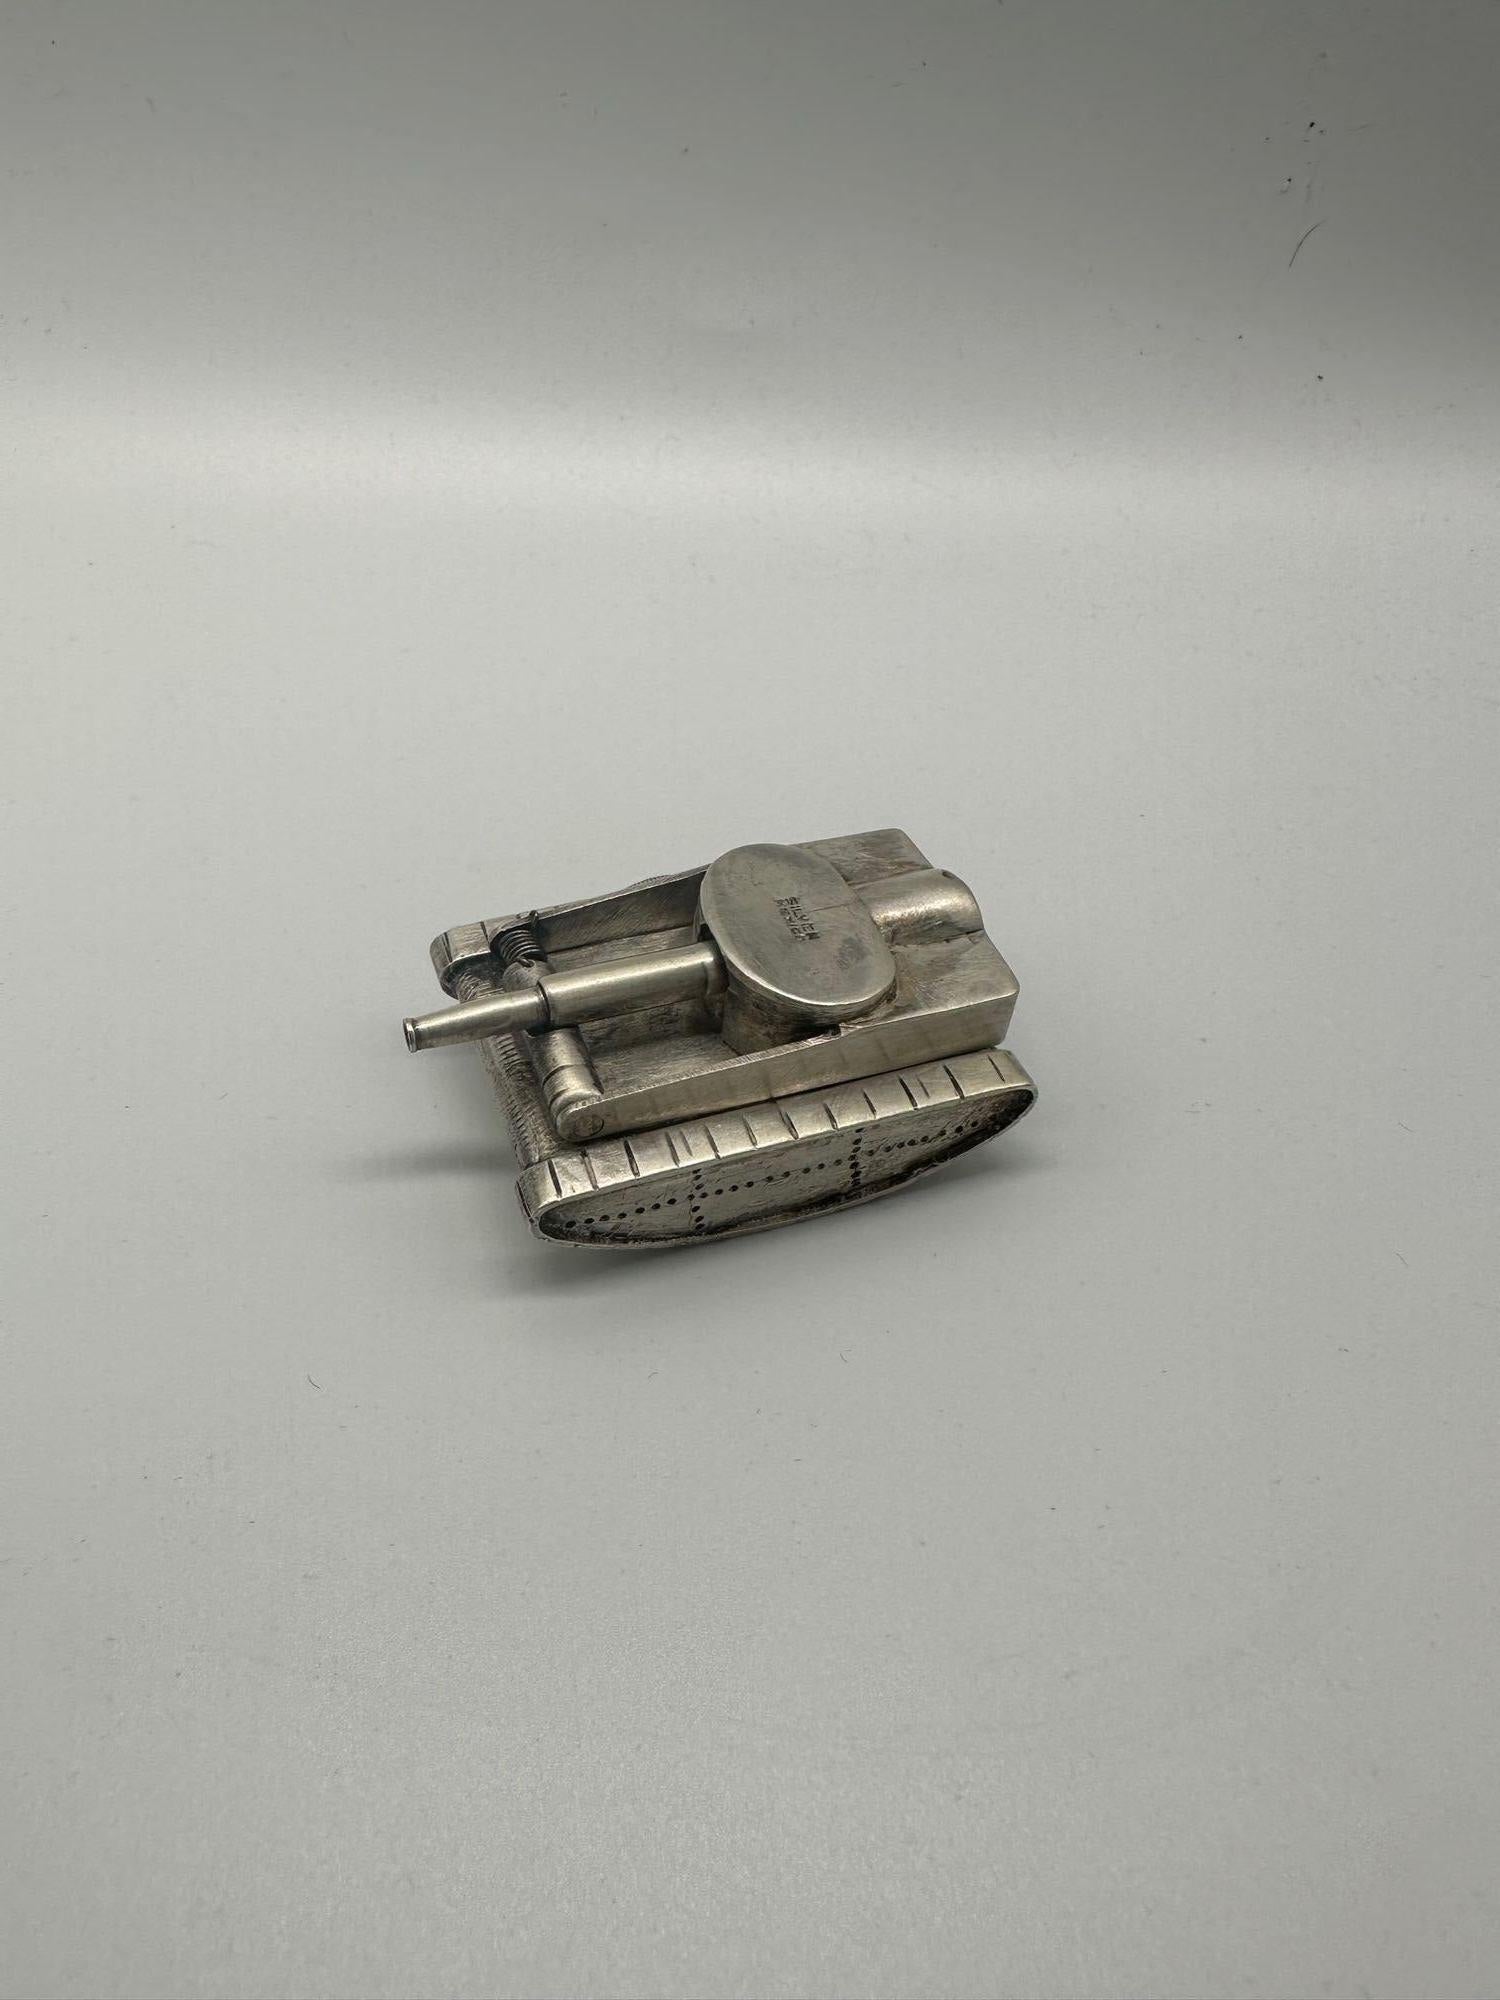 Rare Vintage Military Tank SilverLighter In Excellent Condition For Sale In Van Nuys, CA